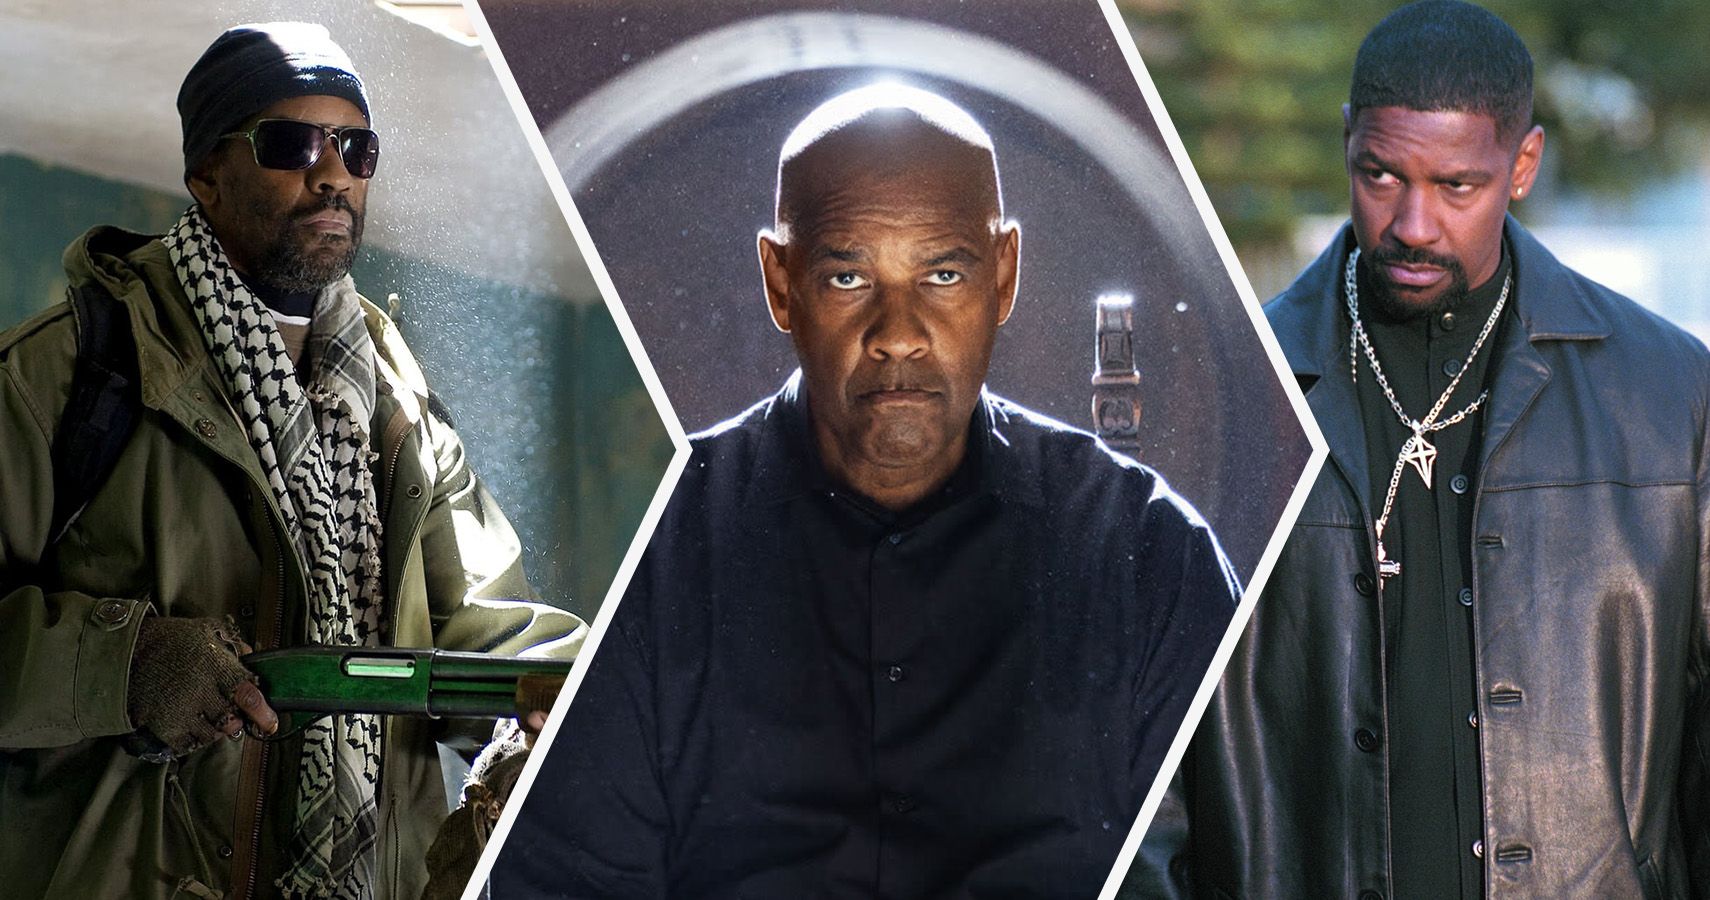 A split image of Denzel Washington in The Book of Eli, Equalizer, and Training Day